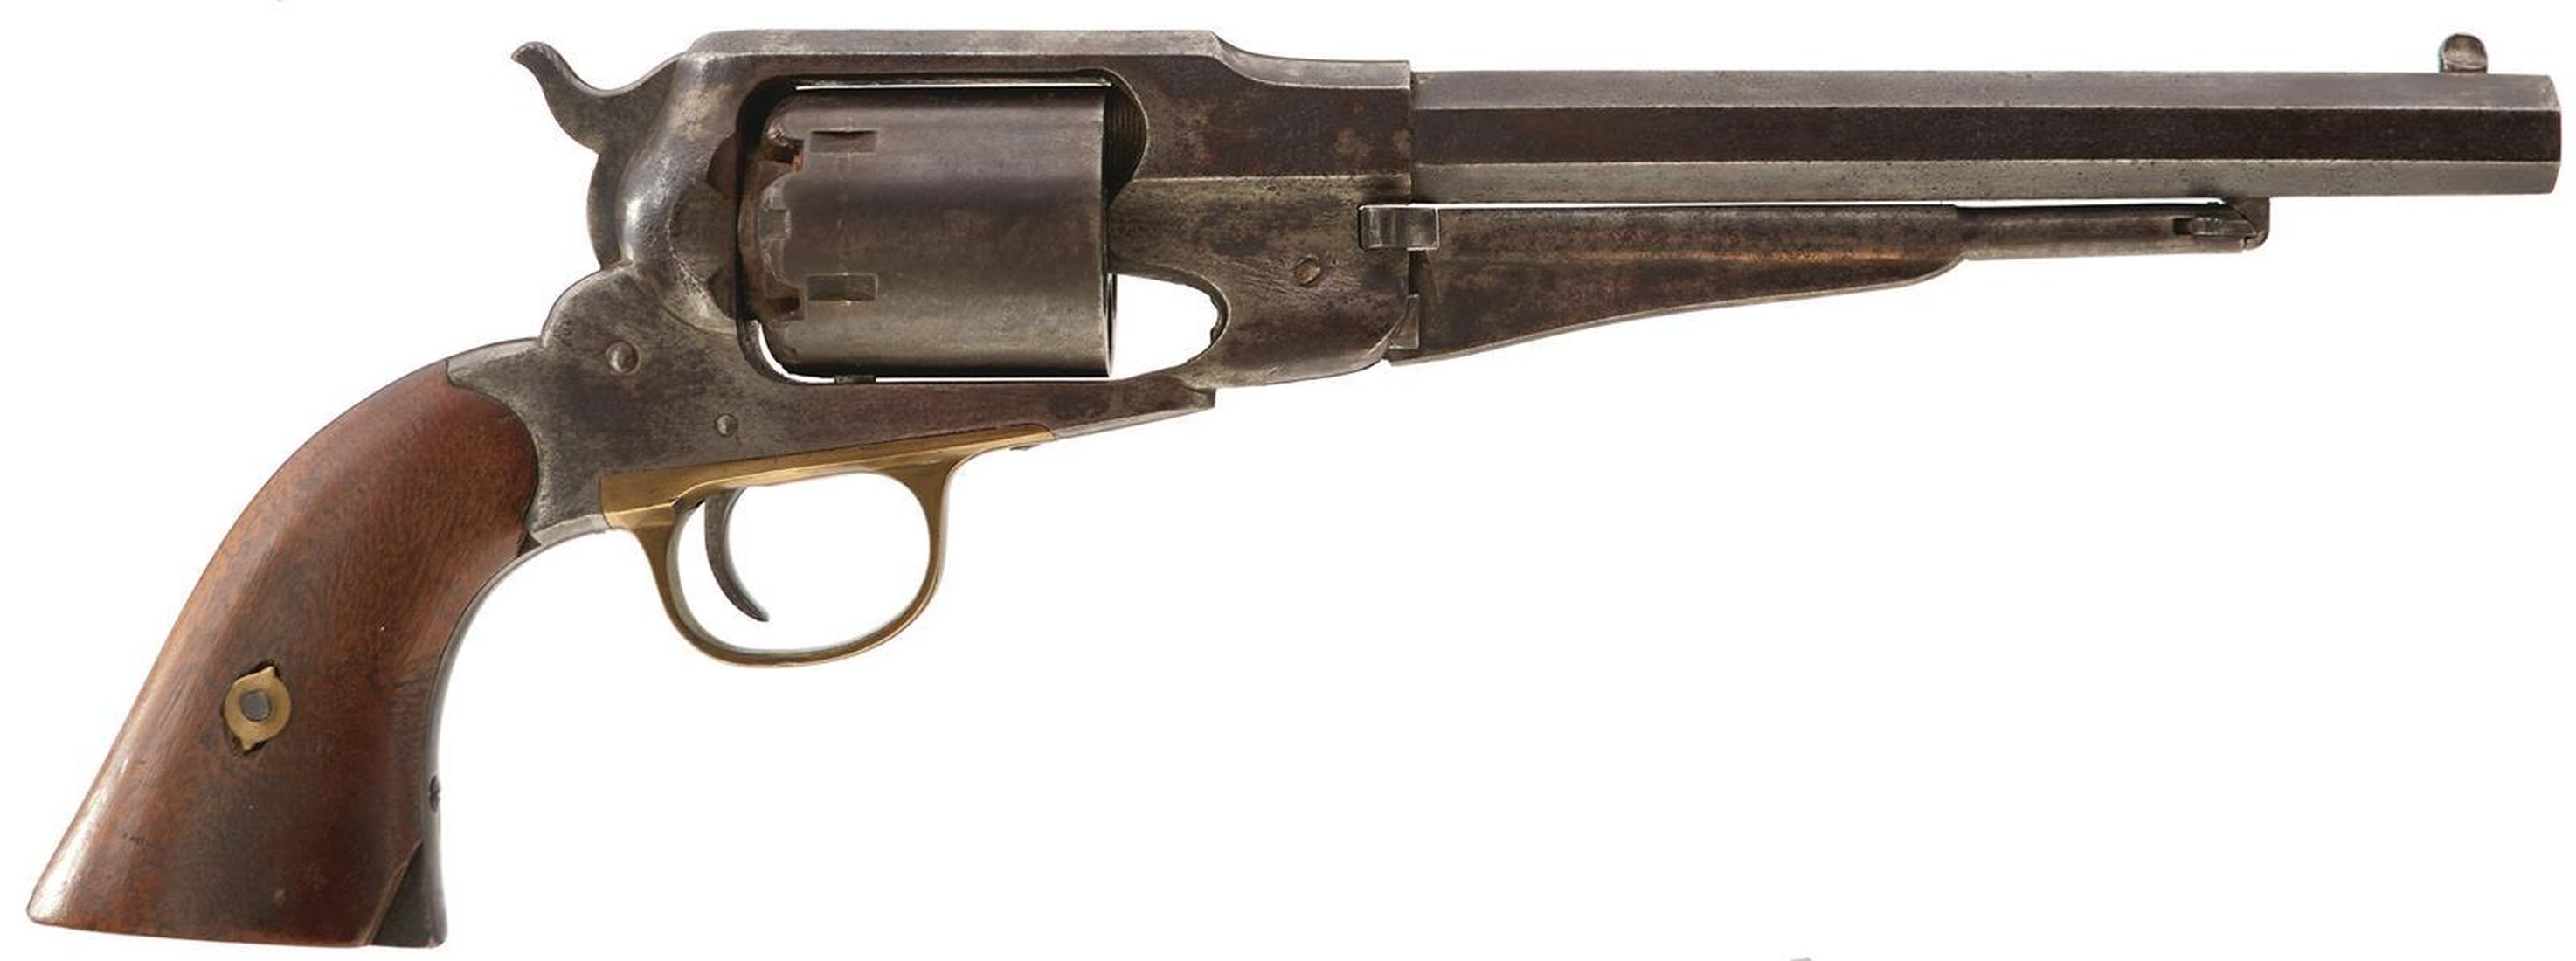 A .44 CALIBRE SIX-SHOT PERCUSSION REMINGTON NEW MODEL ARMY REVOLVER, 8inch sighted octagonal